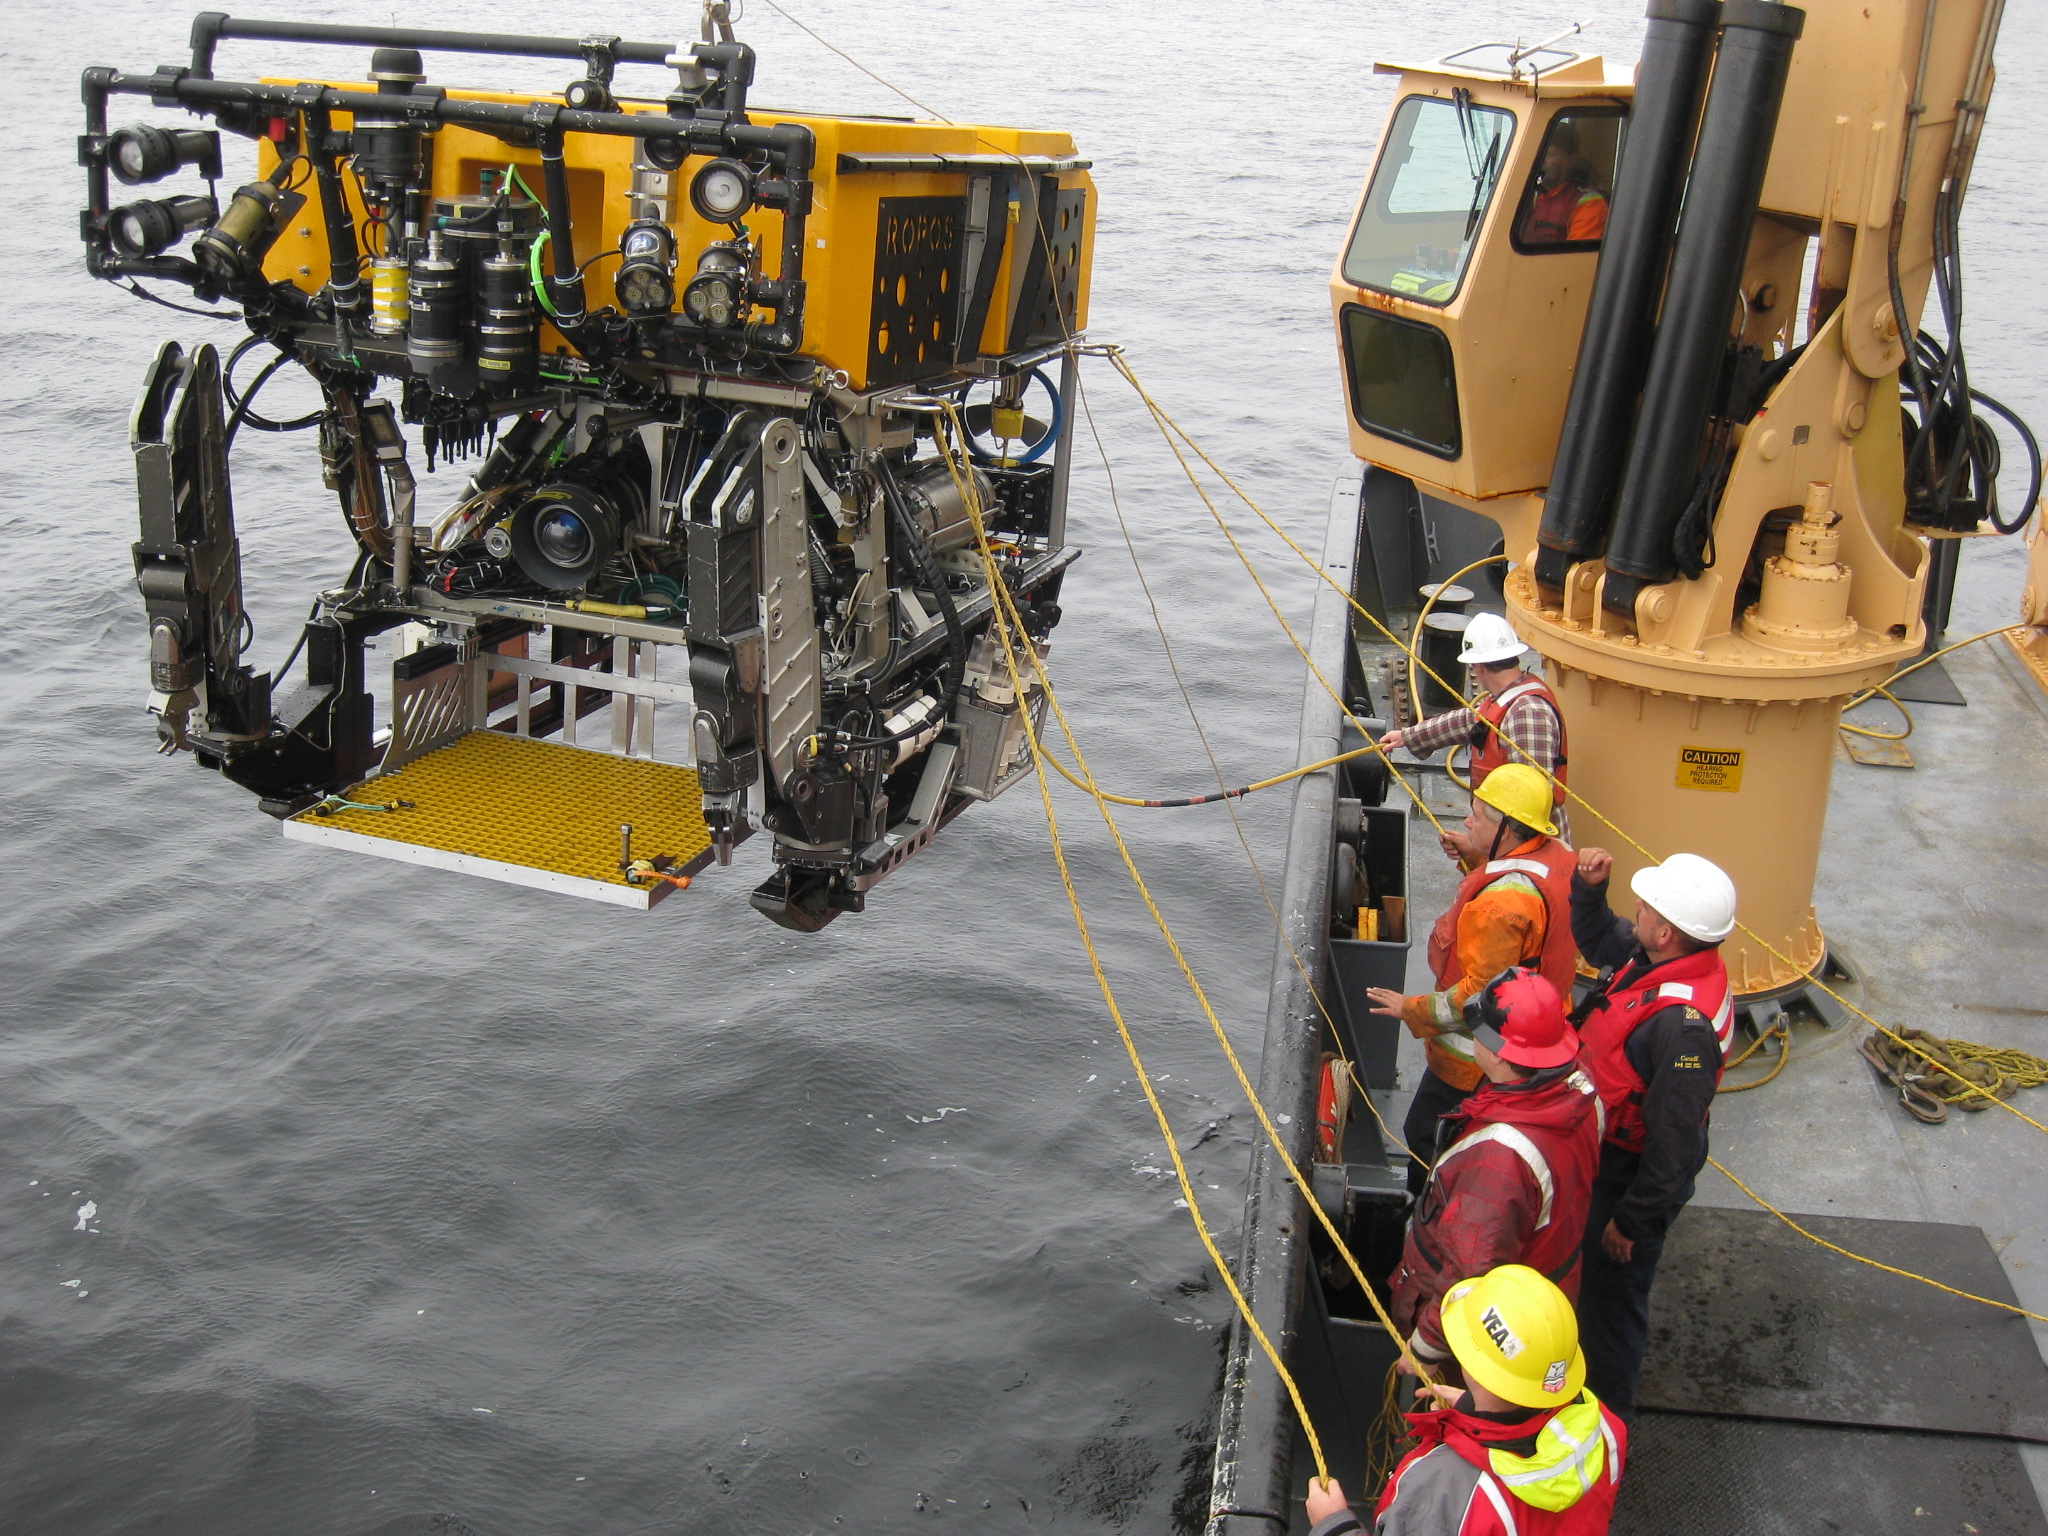 Kim and his team of NRCan scientists use a remotely operated underwater vehicle to study the reefs.